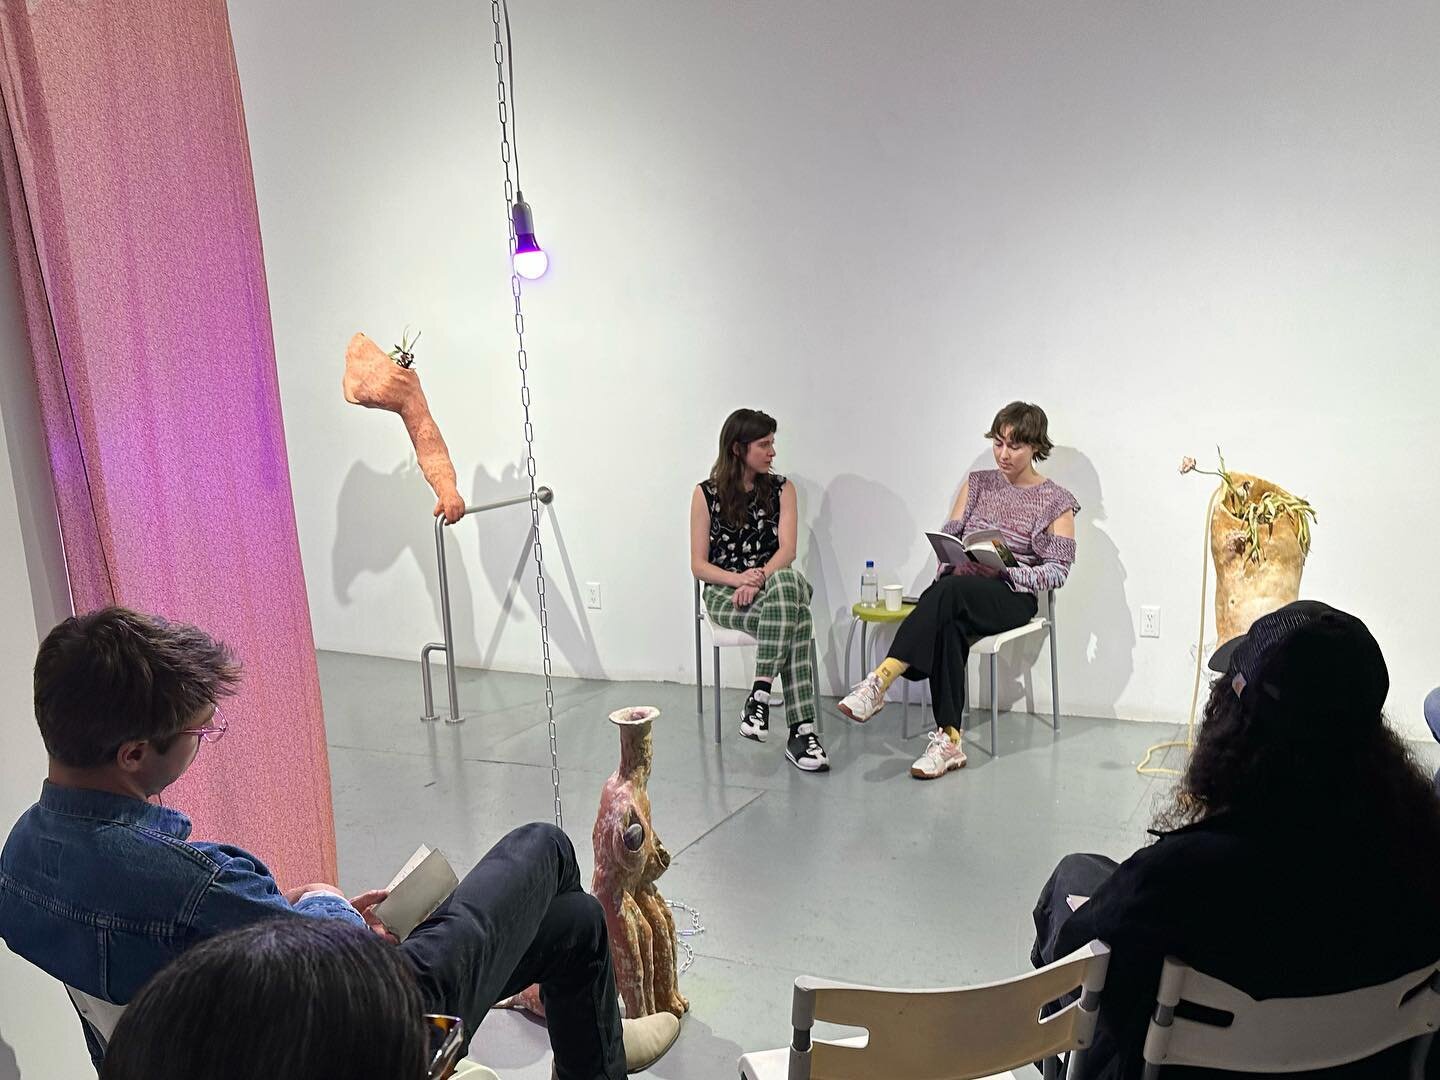 Thank you to everyone who came by last night for the closing reception of &lsquo;Doctrine of Signatures&rsquo;!🌷Artist Nicki Cherry (@nicki__cherry) discussed their work with Dominika Tylcz, and launched the exhibition catalogue for the show, with t